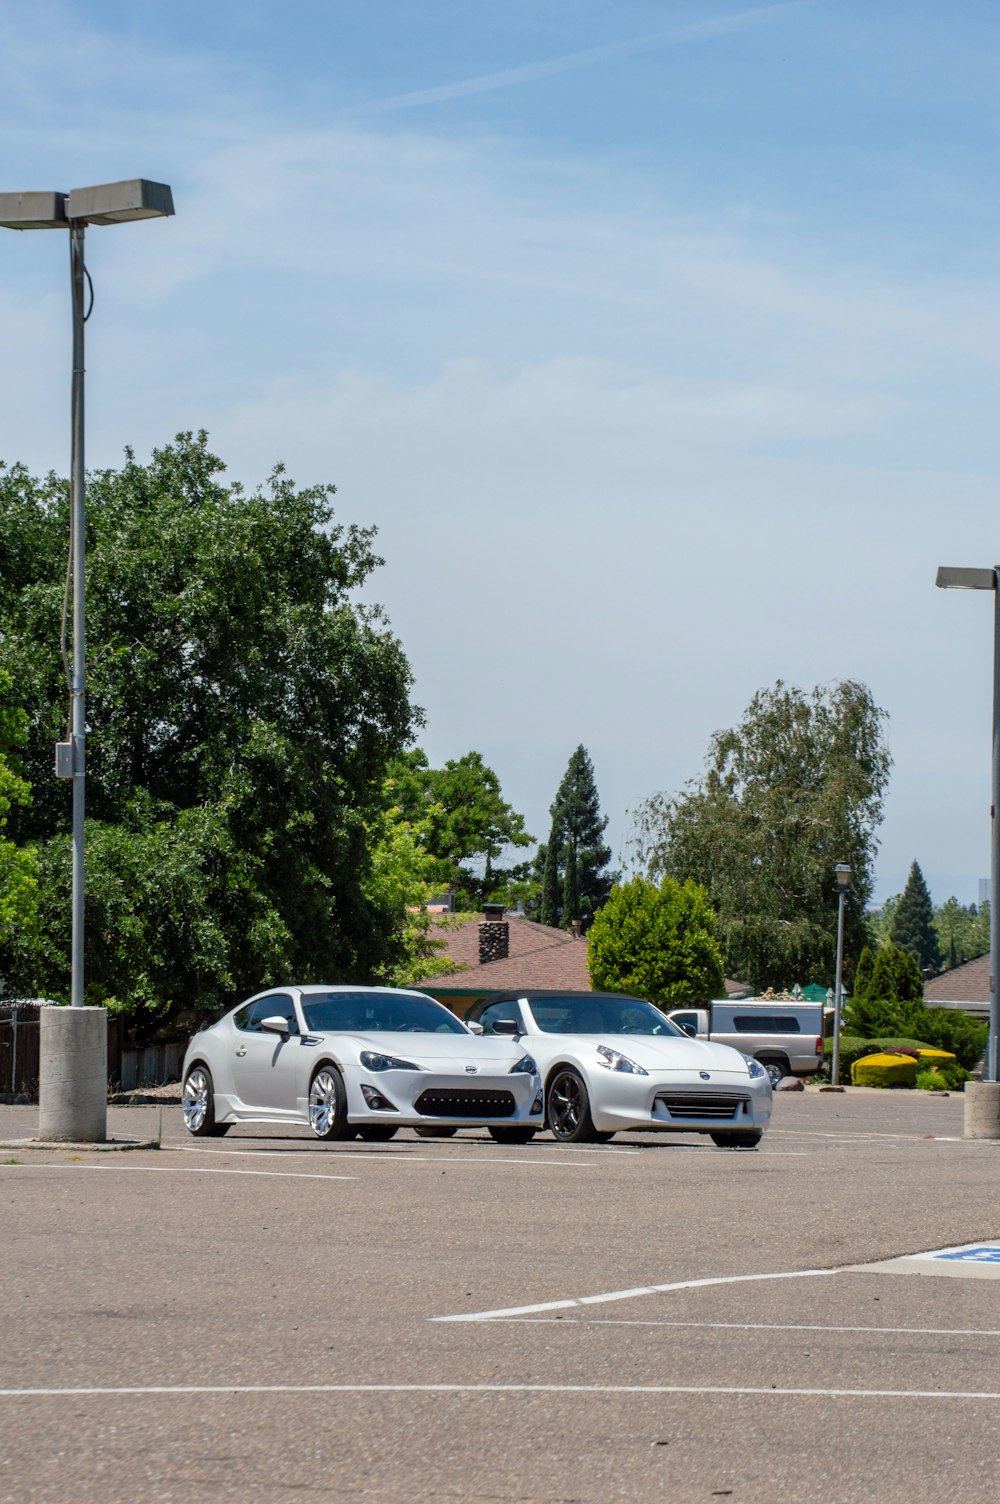 two white sports cars parked in a parking lot